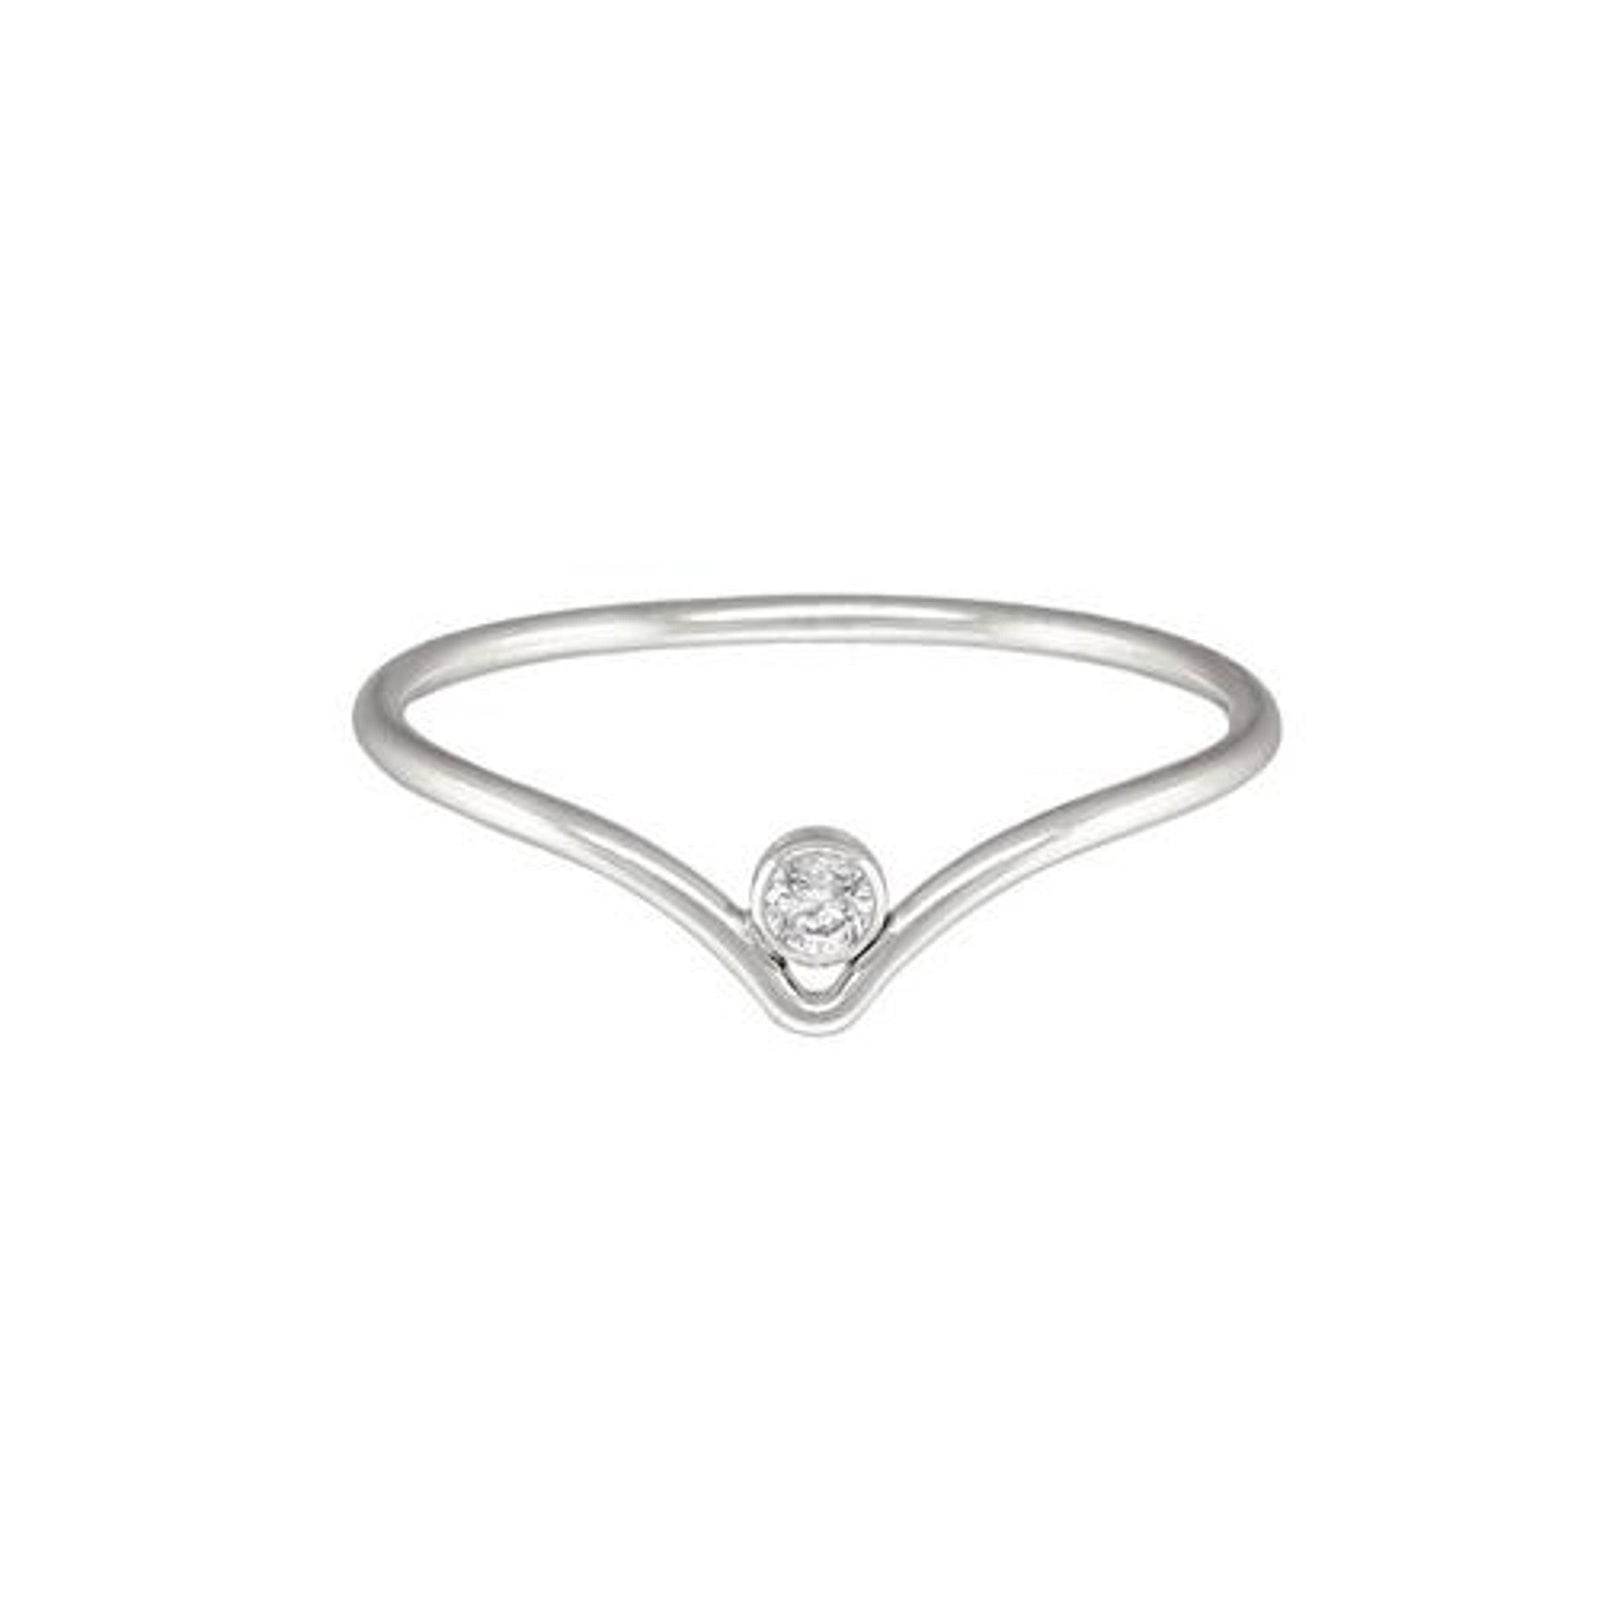 Sparkle CZ Chevron Ring in Sterling Silver